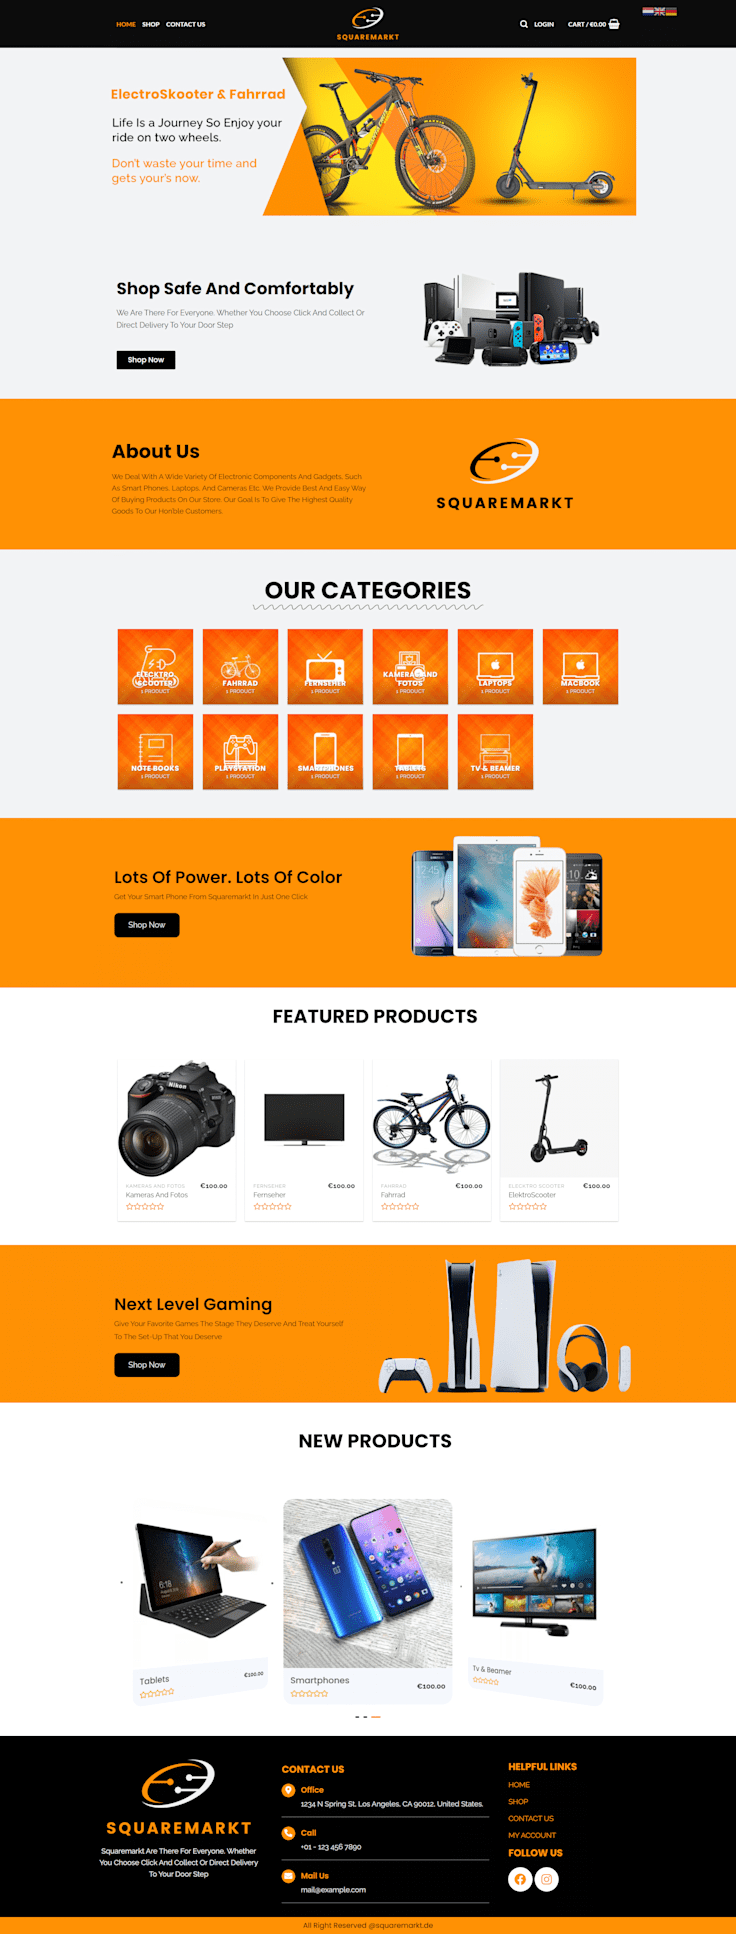 a Graphic of an innovative e-commerce website design selling a wide range of electronic accessories, featuring modern and high-tech products.